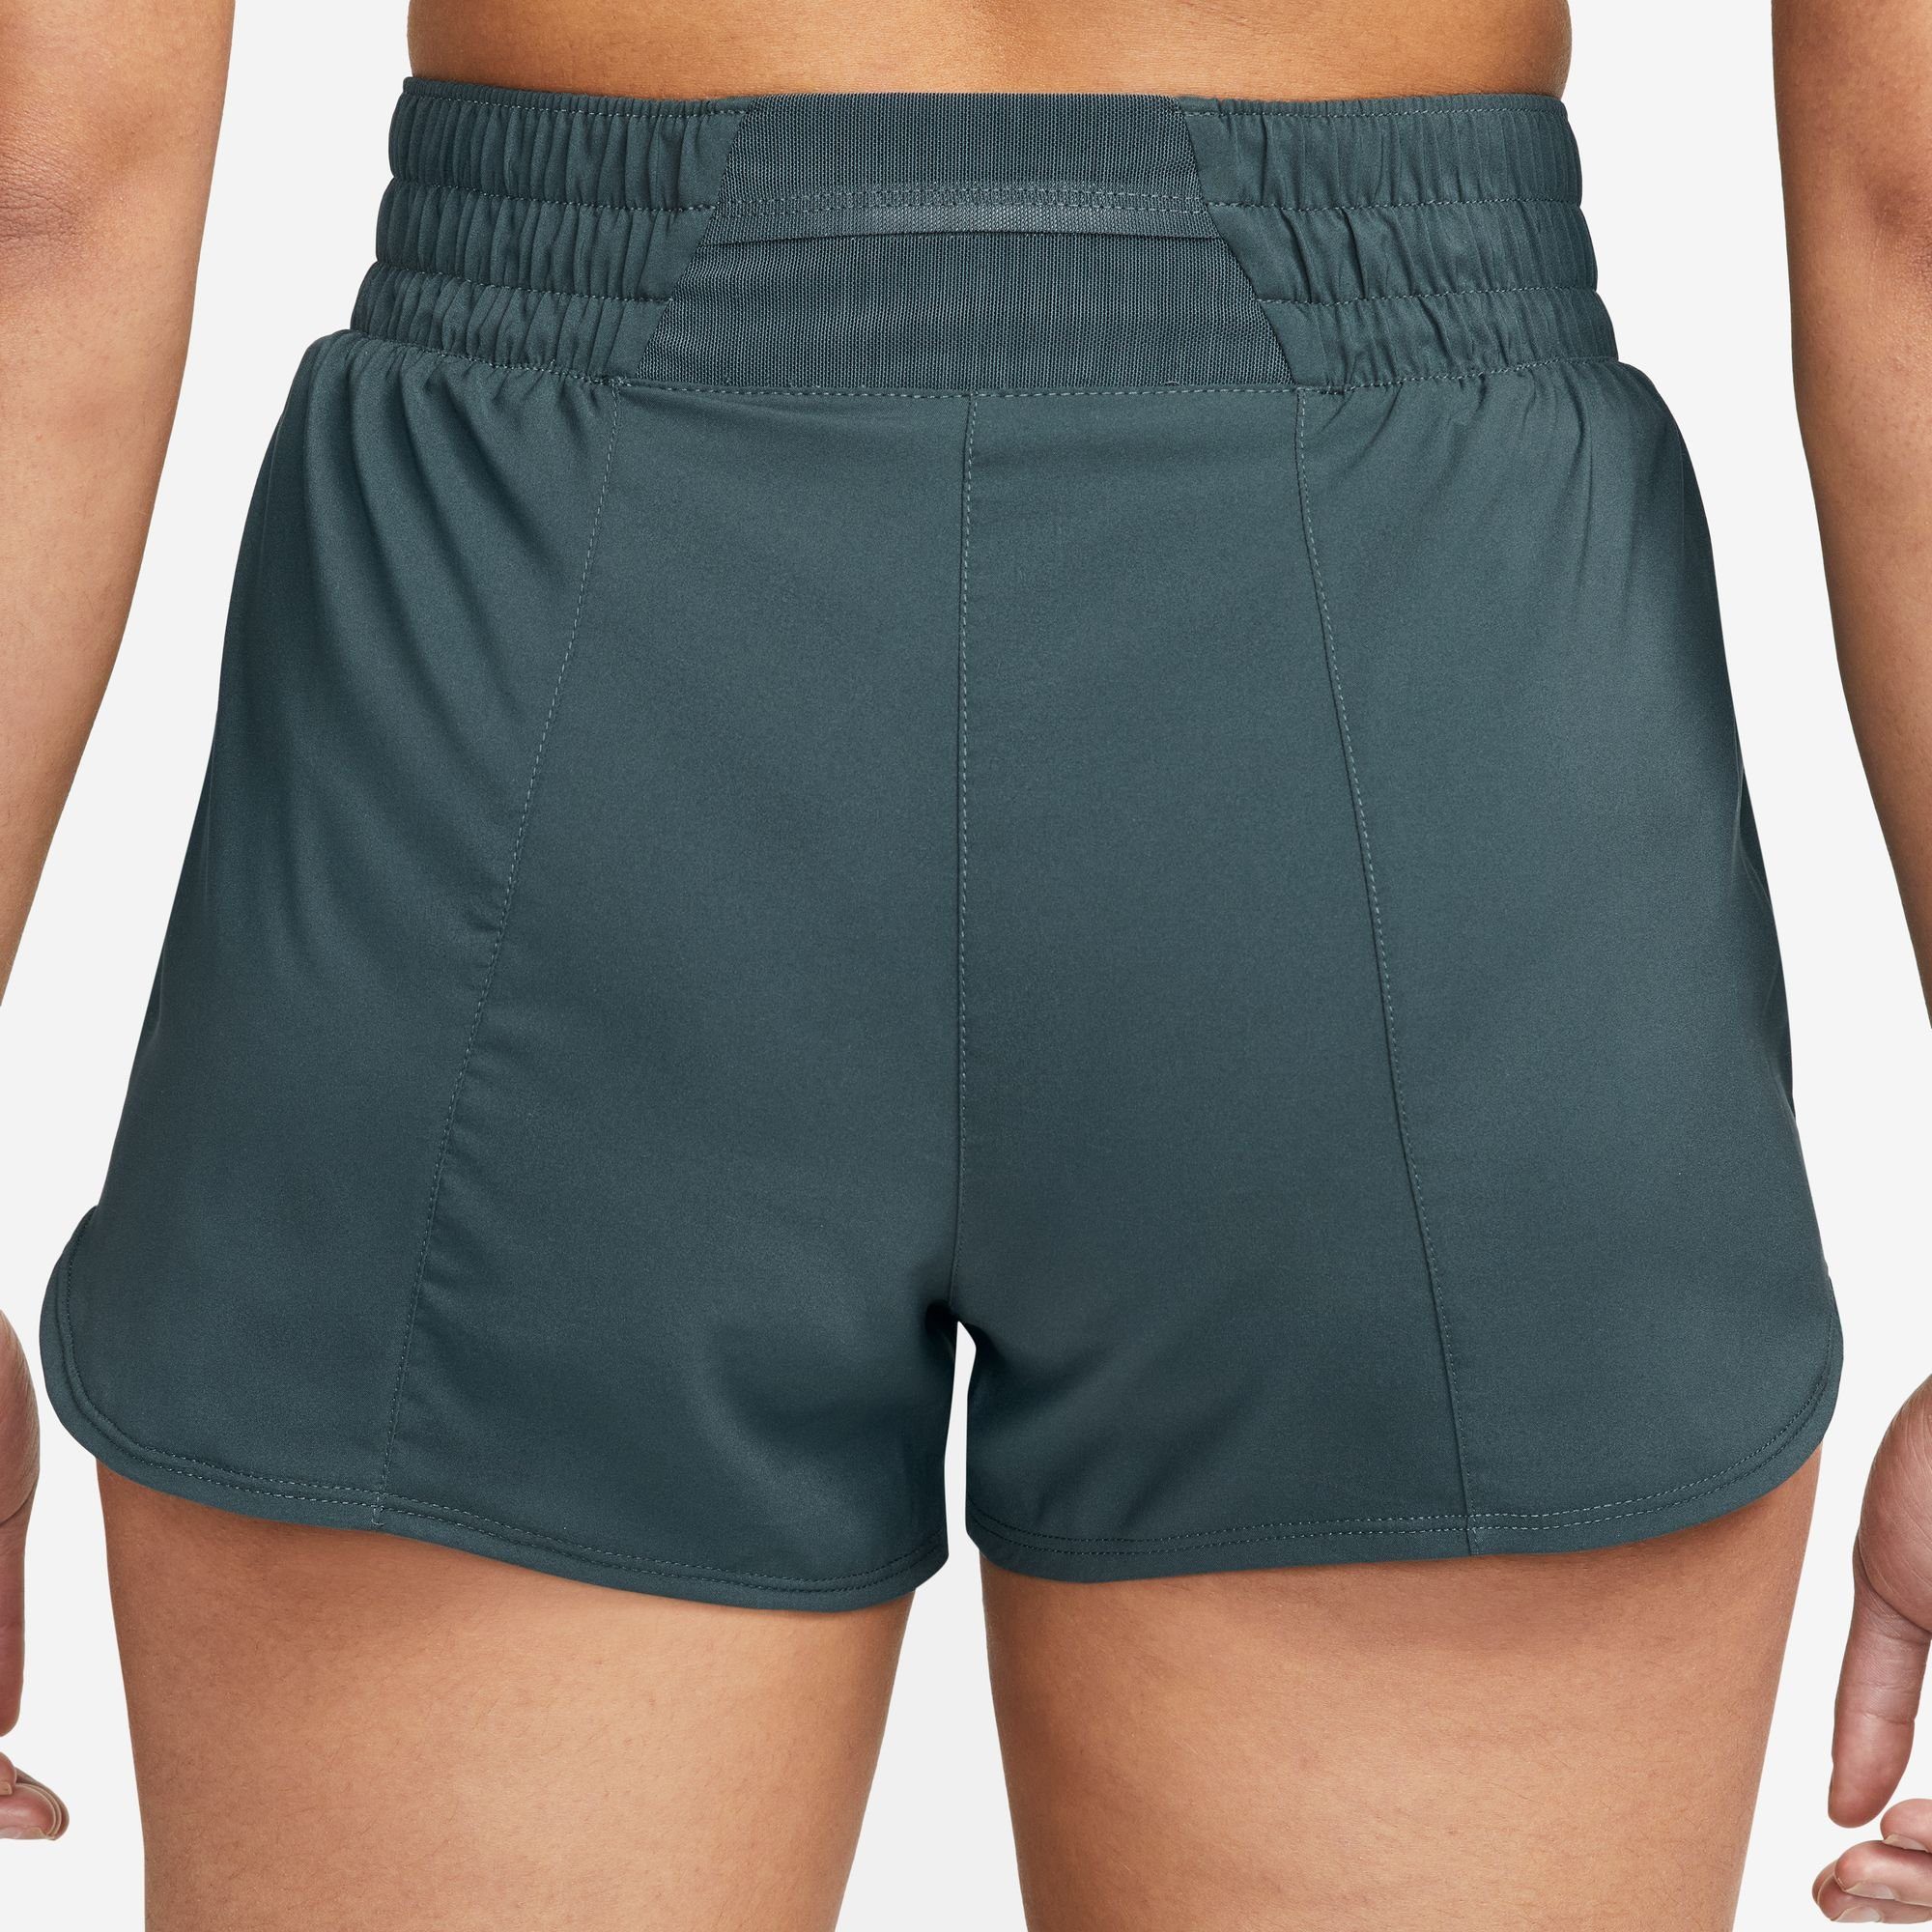 Trainingsshorts DEEP JUNGLE/REFLECTIVE ONE MID-RISE SILV DRI-FIT BRIEF-LINED WOMEN'S Nike SHORTS